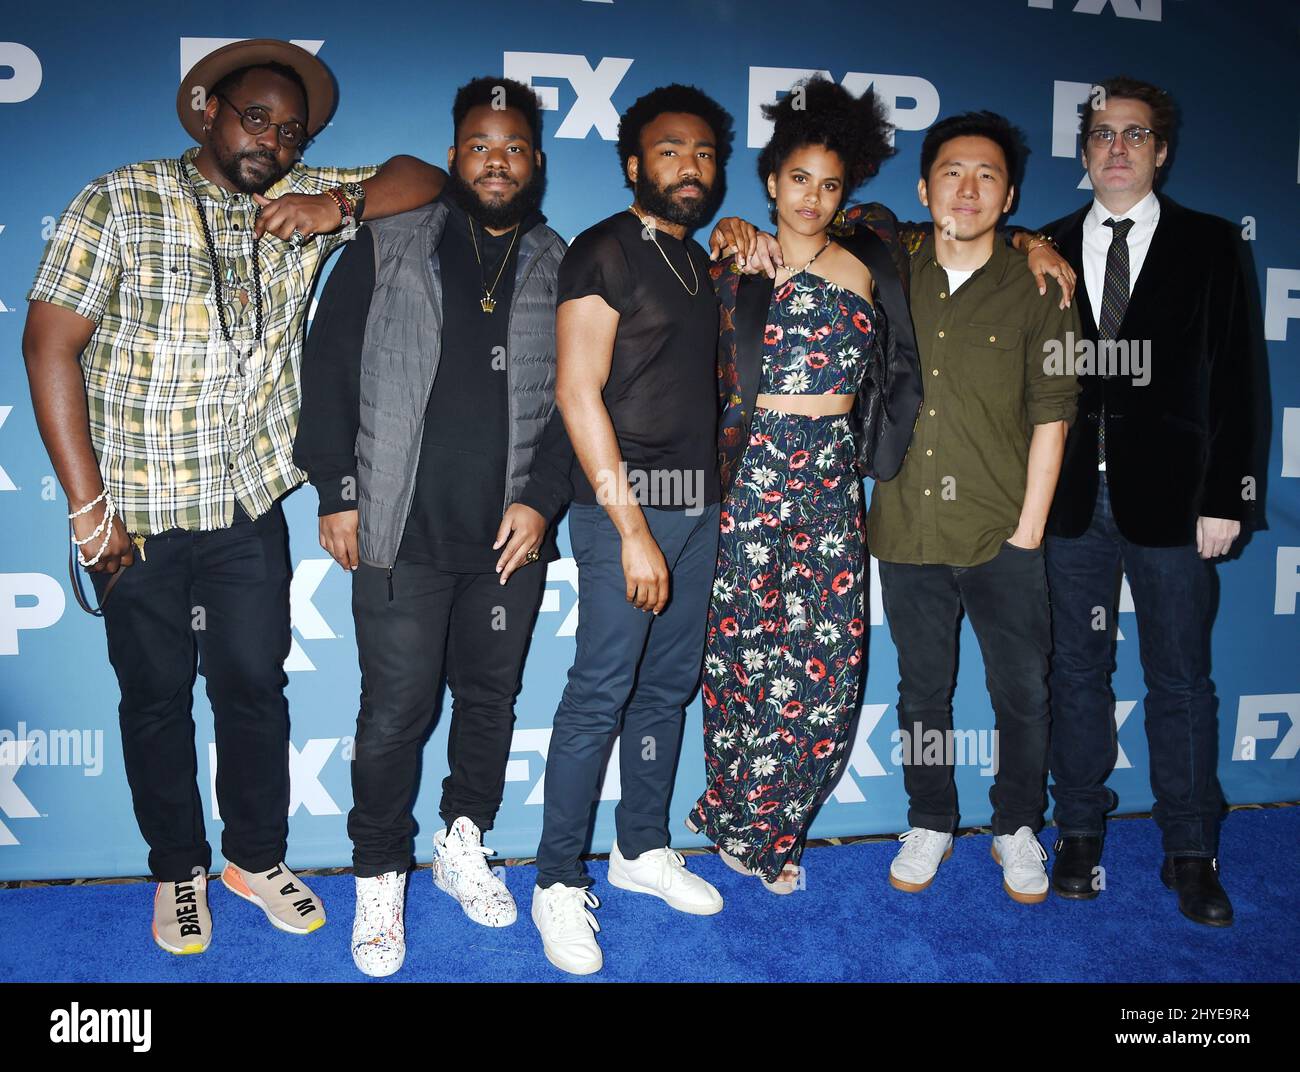 Brian Tyree Henry, Stephen Glover, Donald Glover, Zazie Beetz, Hiro Murai and Paul Simms attending the FX Starwalk during the 2018 Winter TCA Tour held at the Langham Huntington Hotel on January 5, 2018 in Pasadena, CA Stock Photo